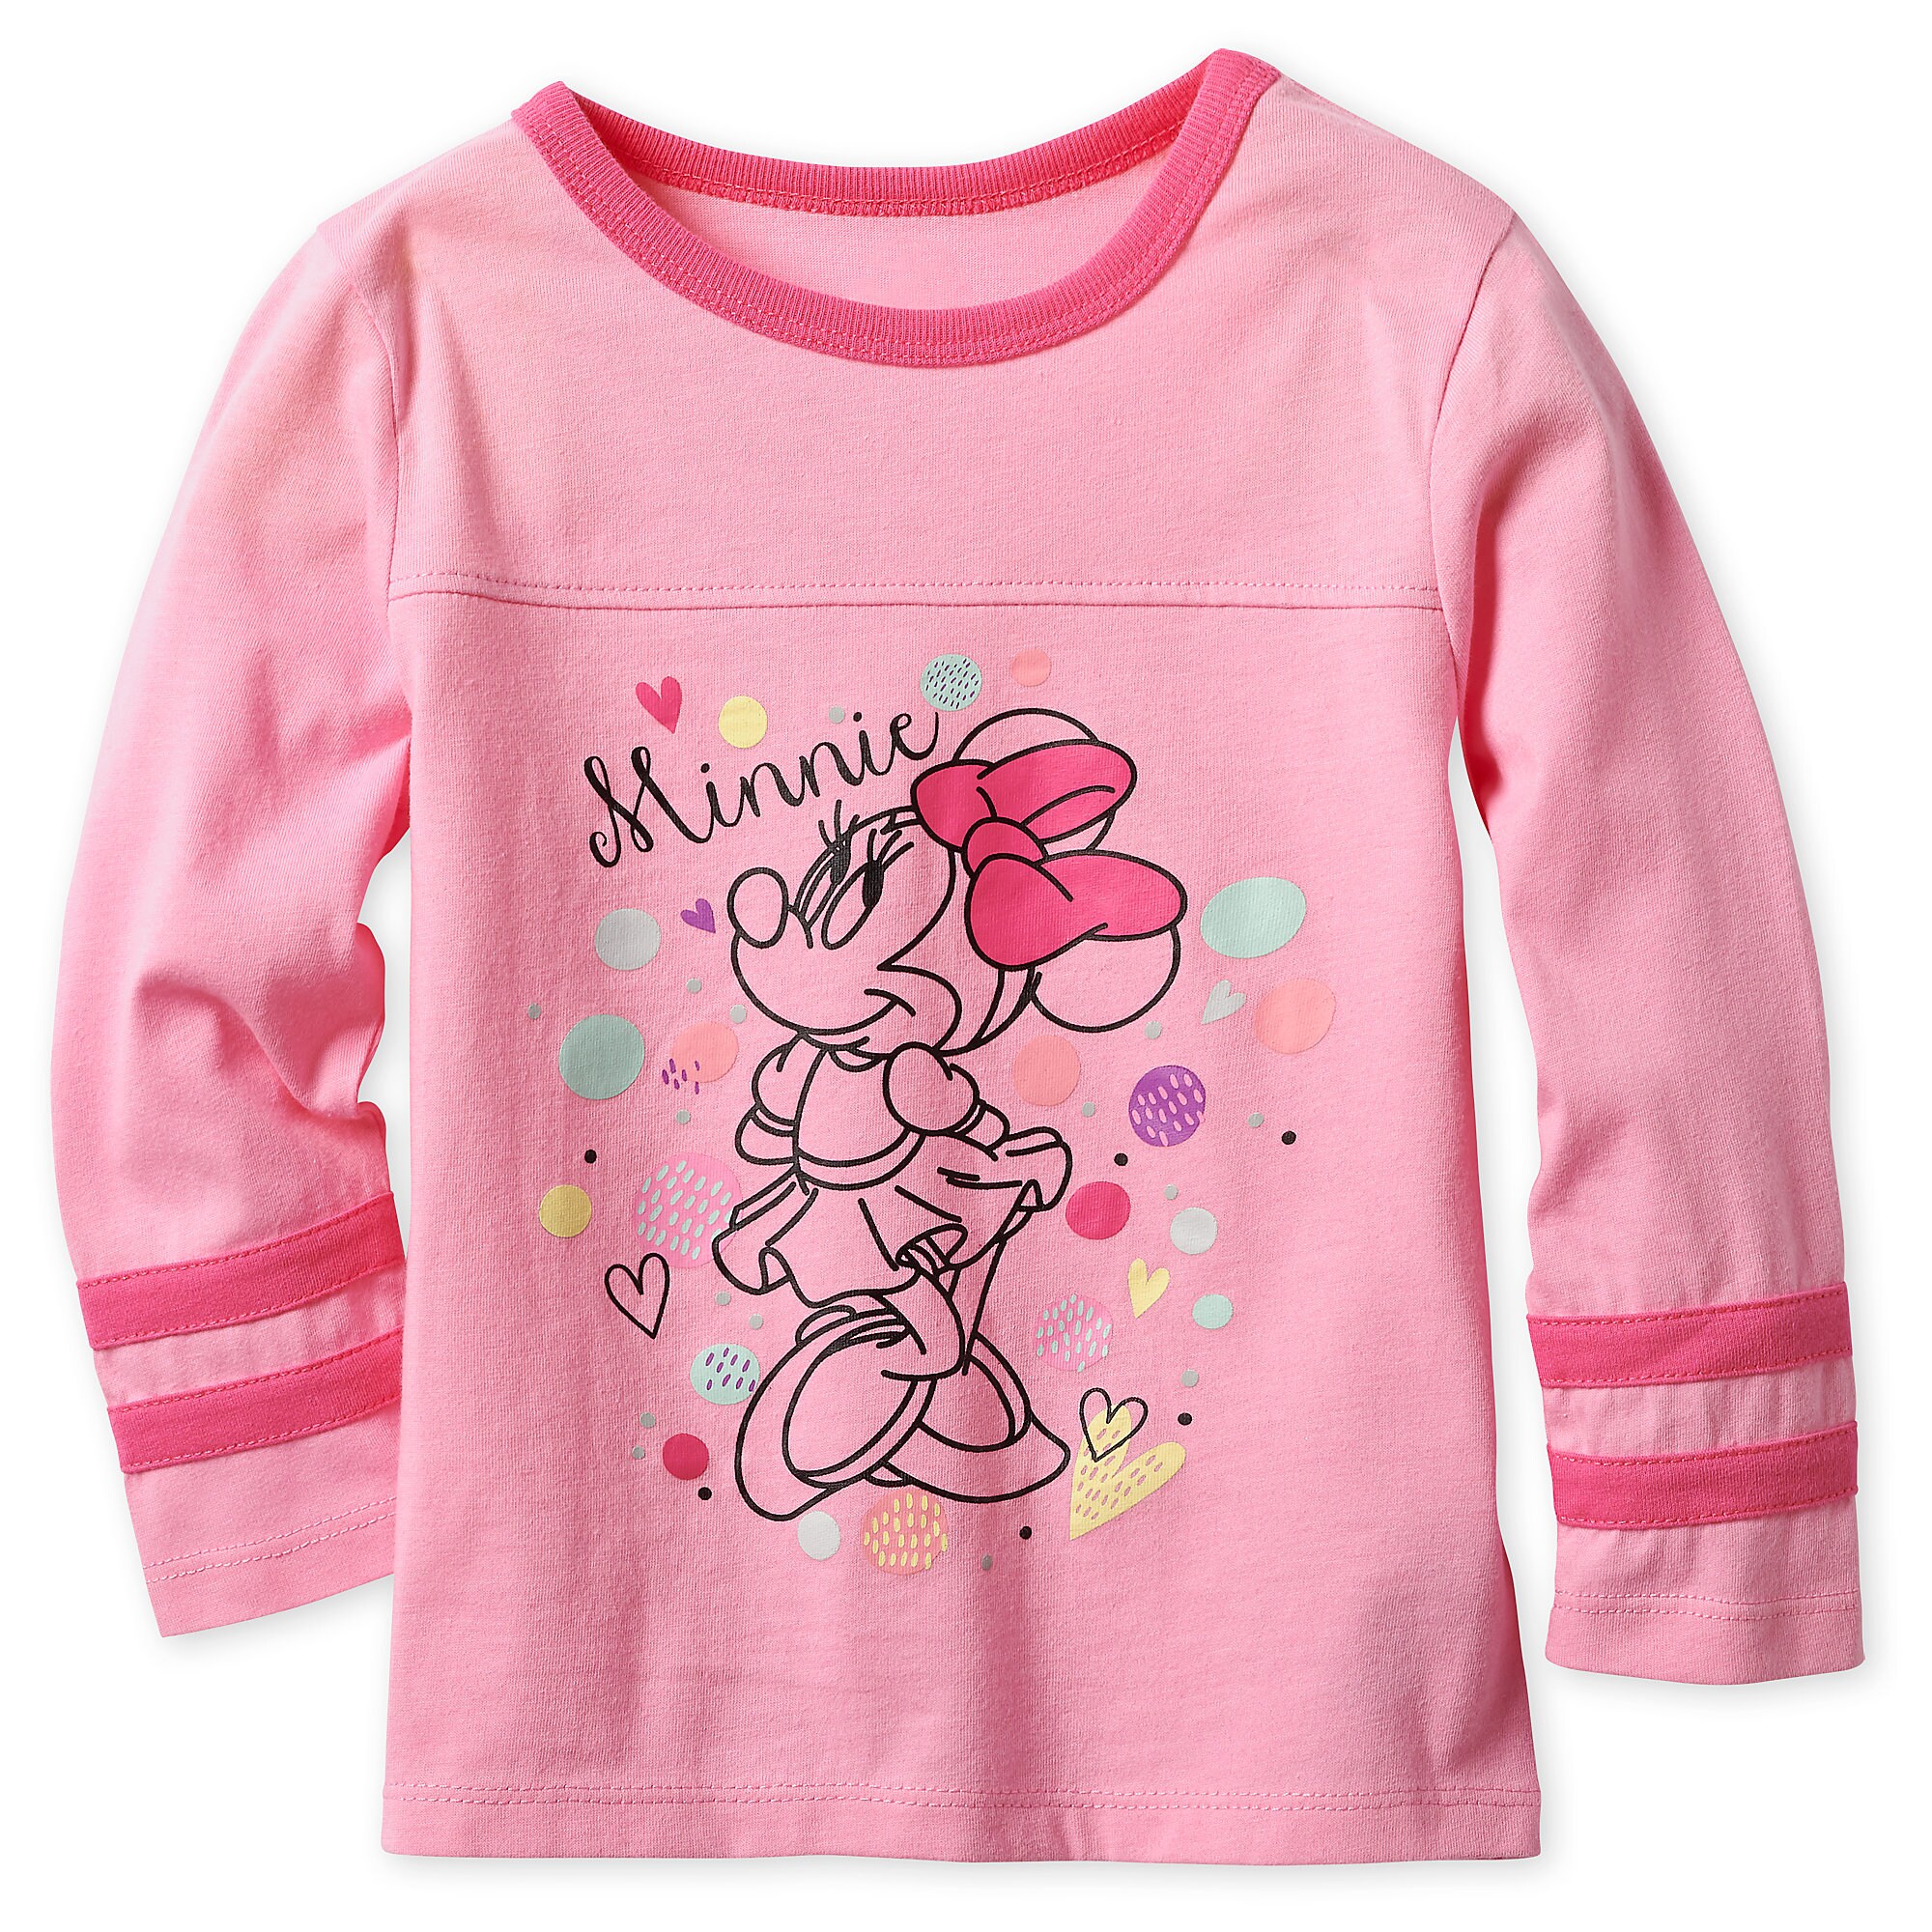 Minnie Mouse Long Sleeve T-Shirt for Girls